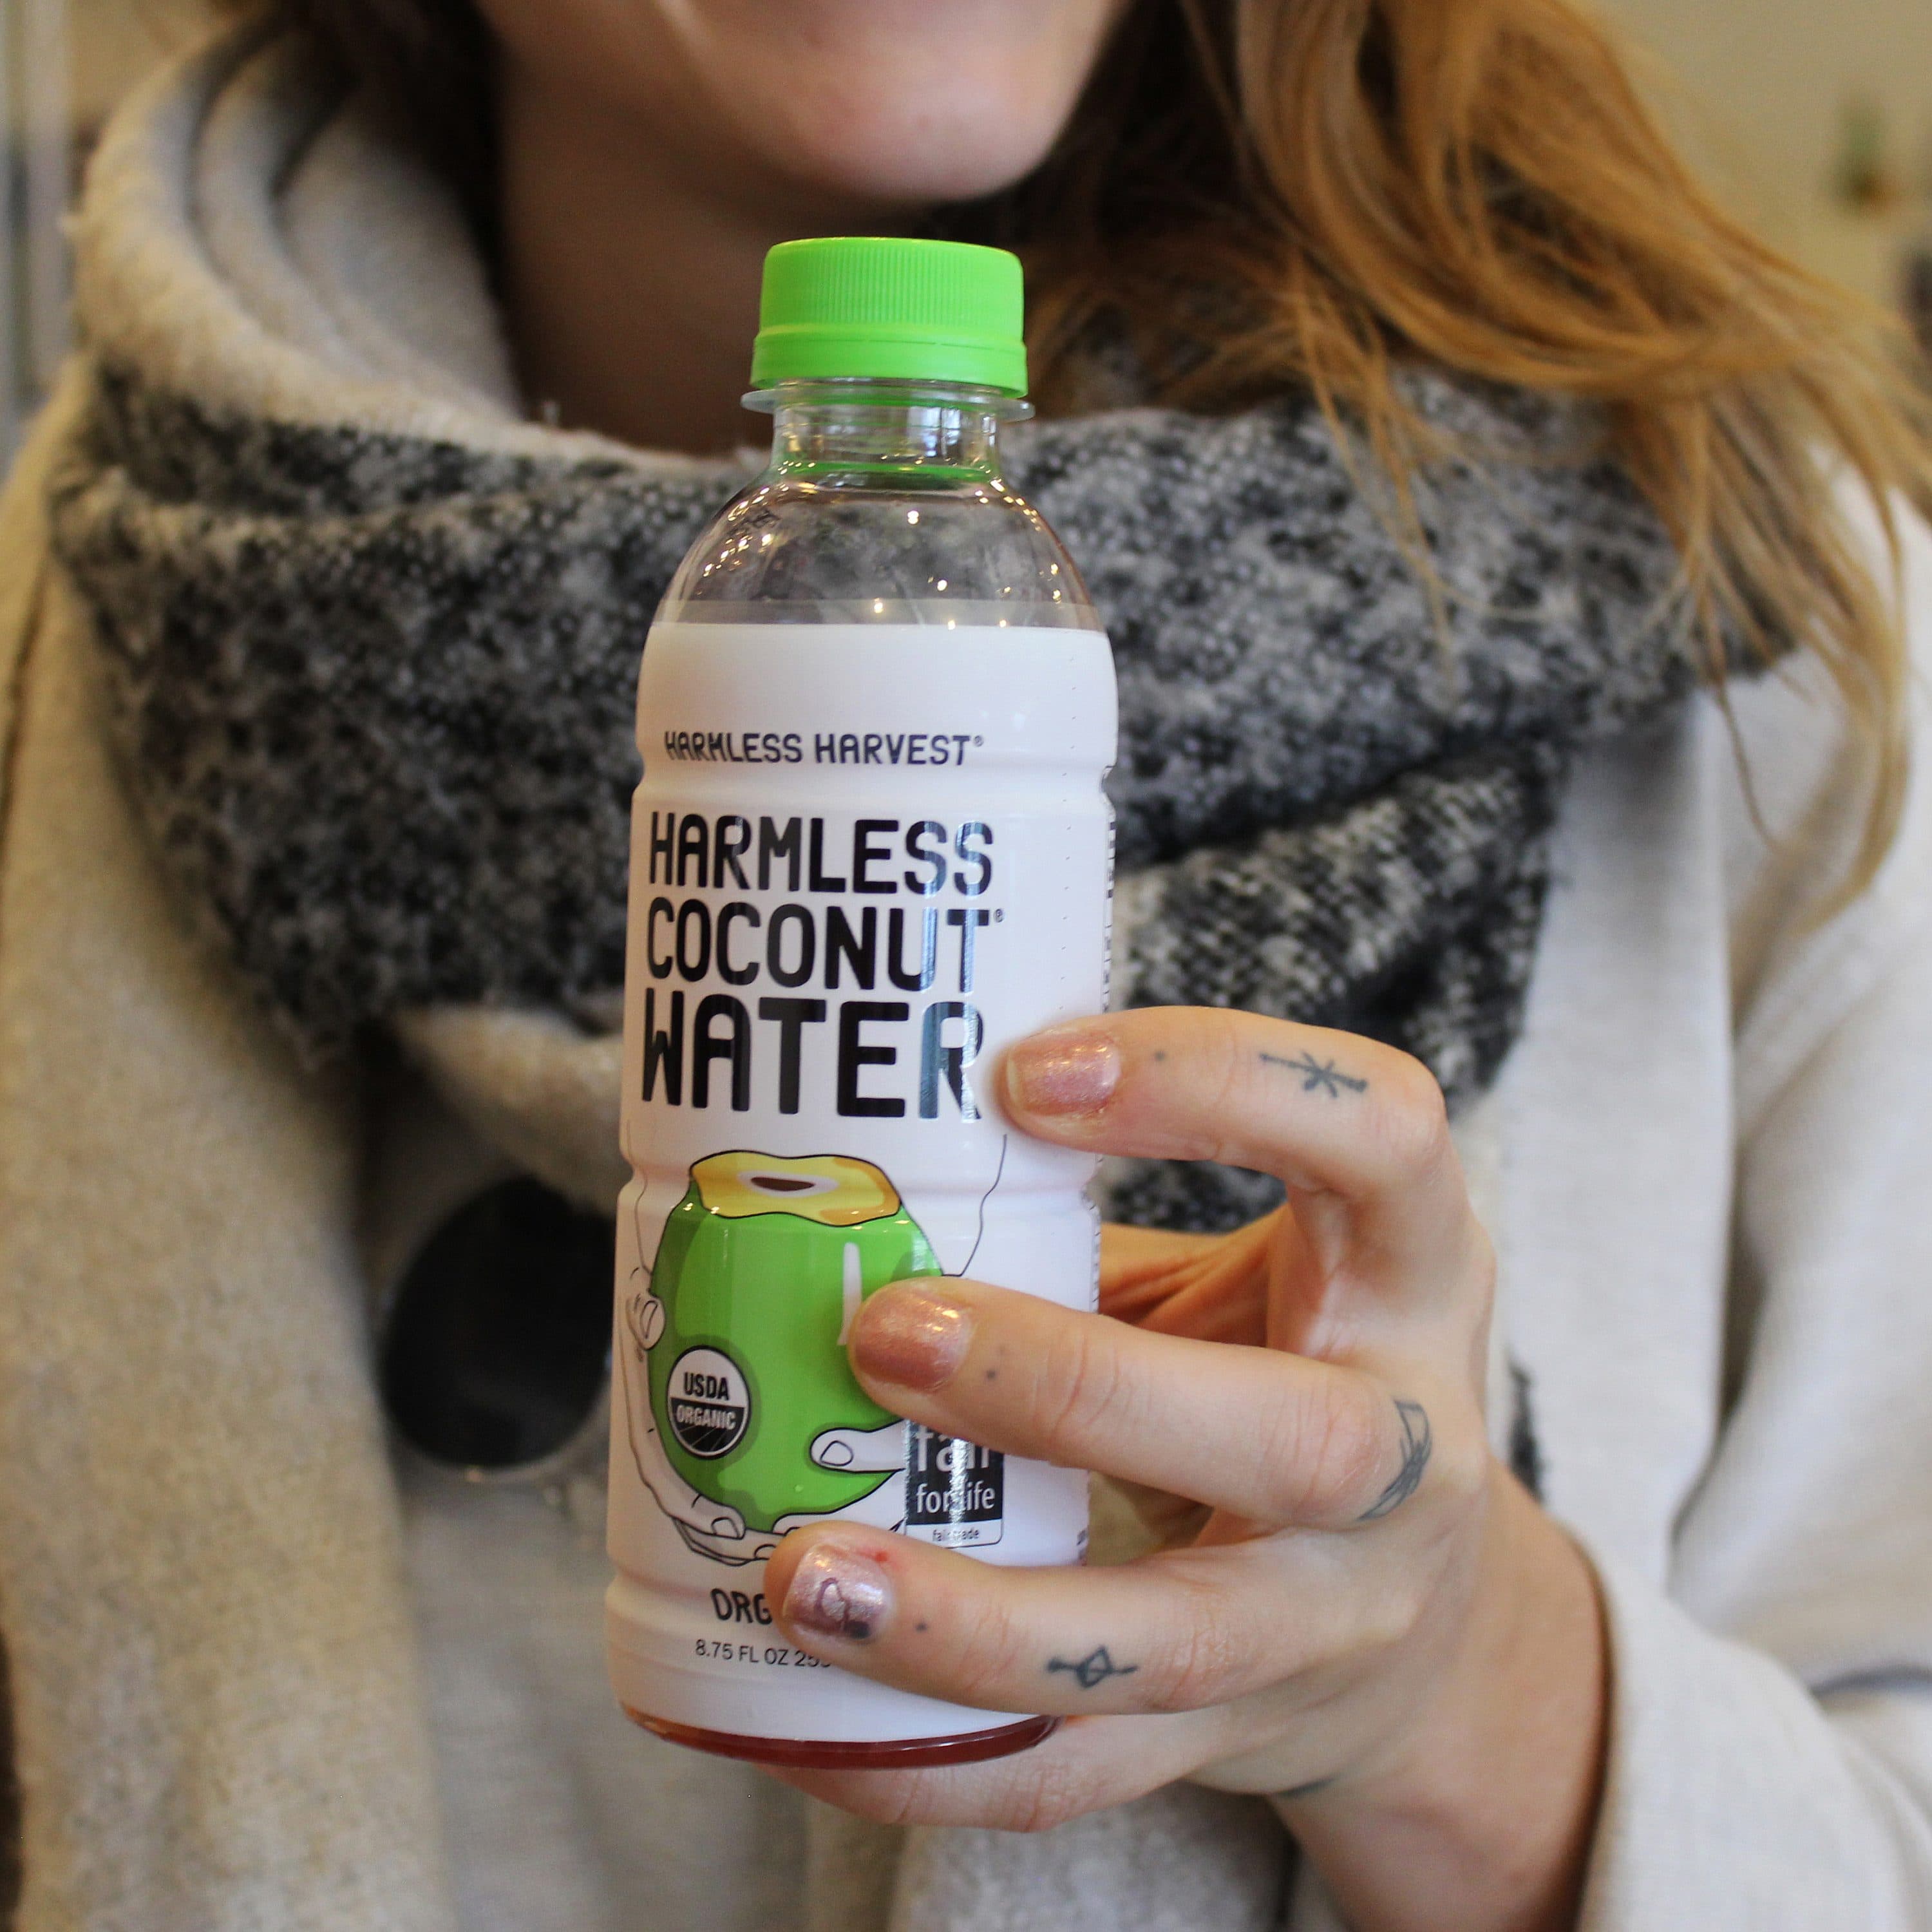 A person with light brown hair holds a bottle of Harmless Harvest Coconut Water. The person is wearing a grey scarf and a light-colored top. The focus is on the bottle, which has a green label with a coconut illustration and the brand name.